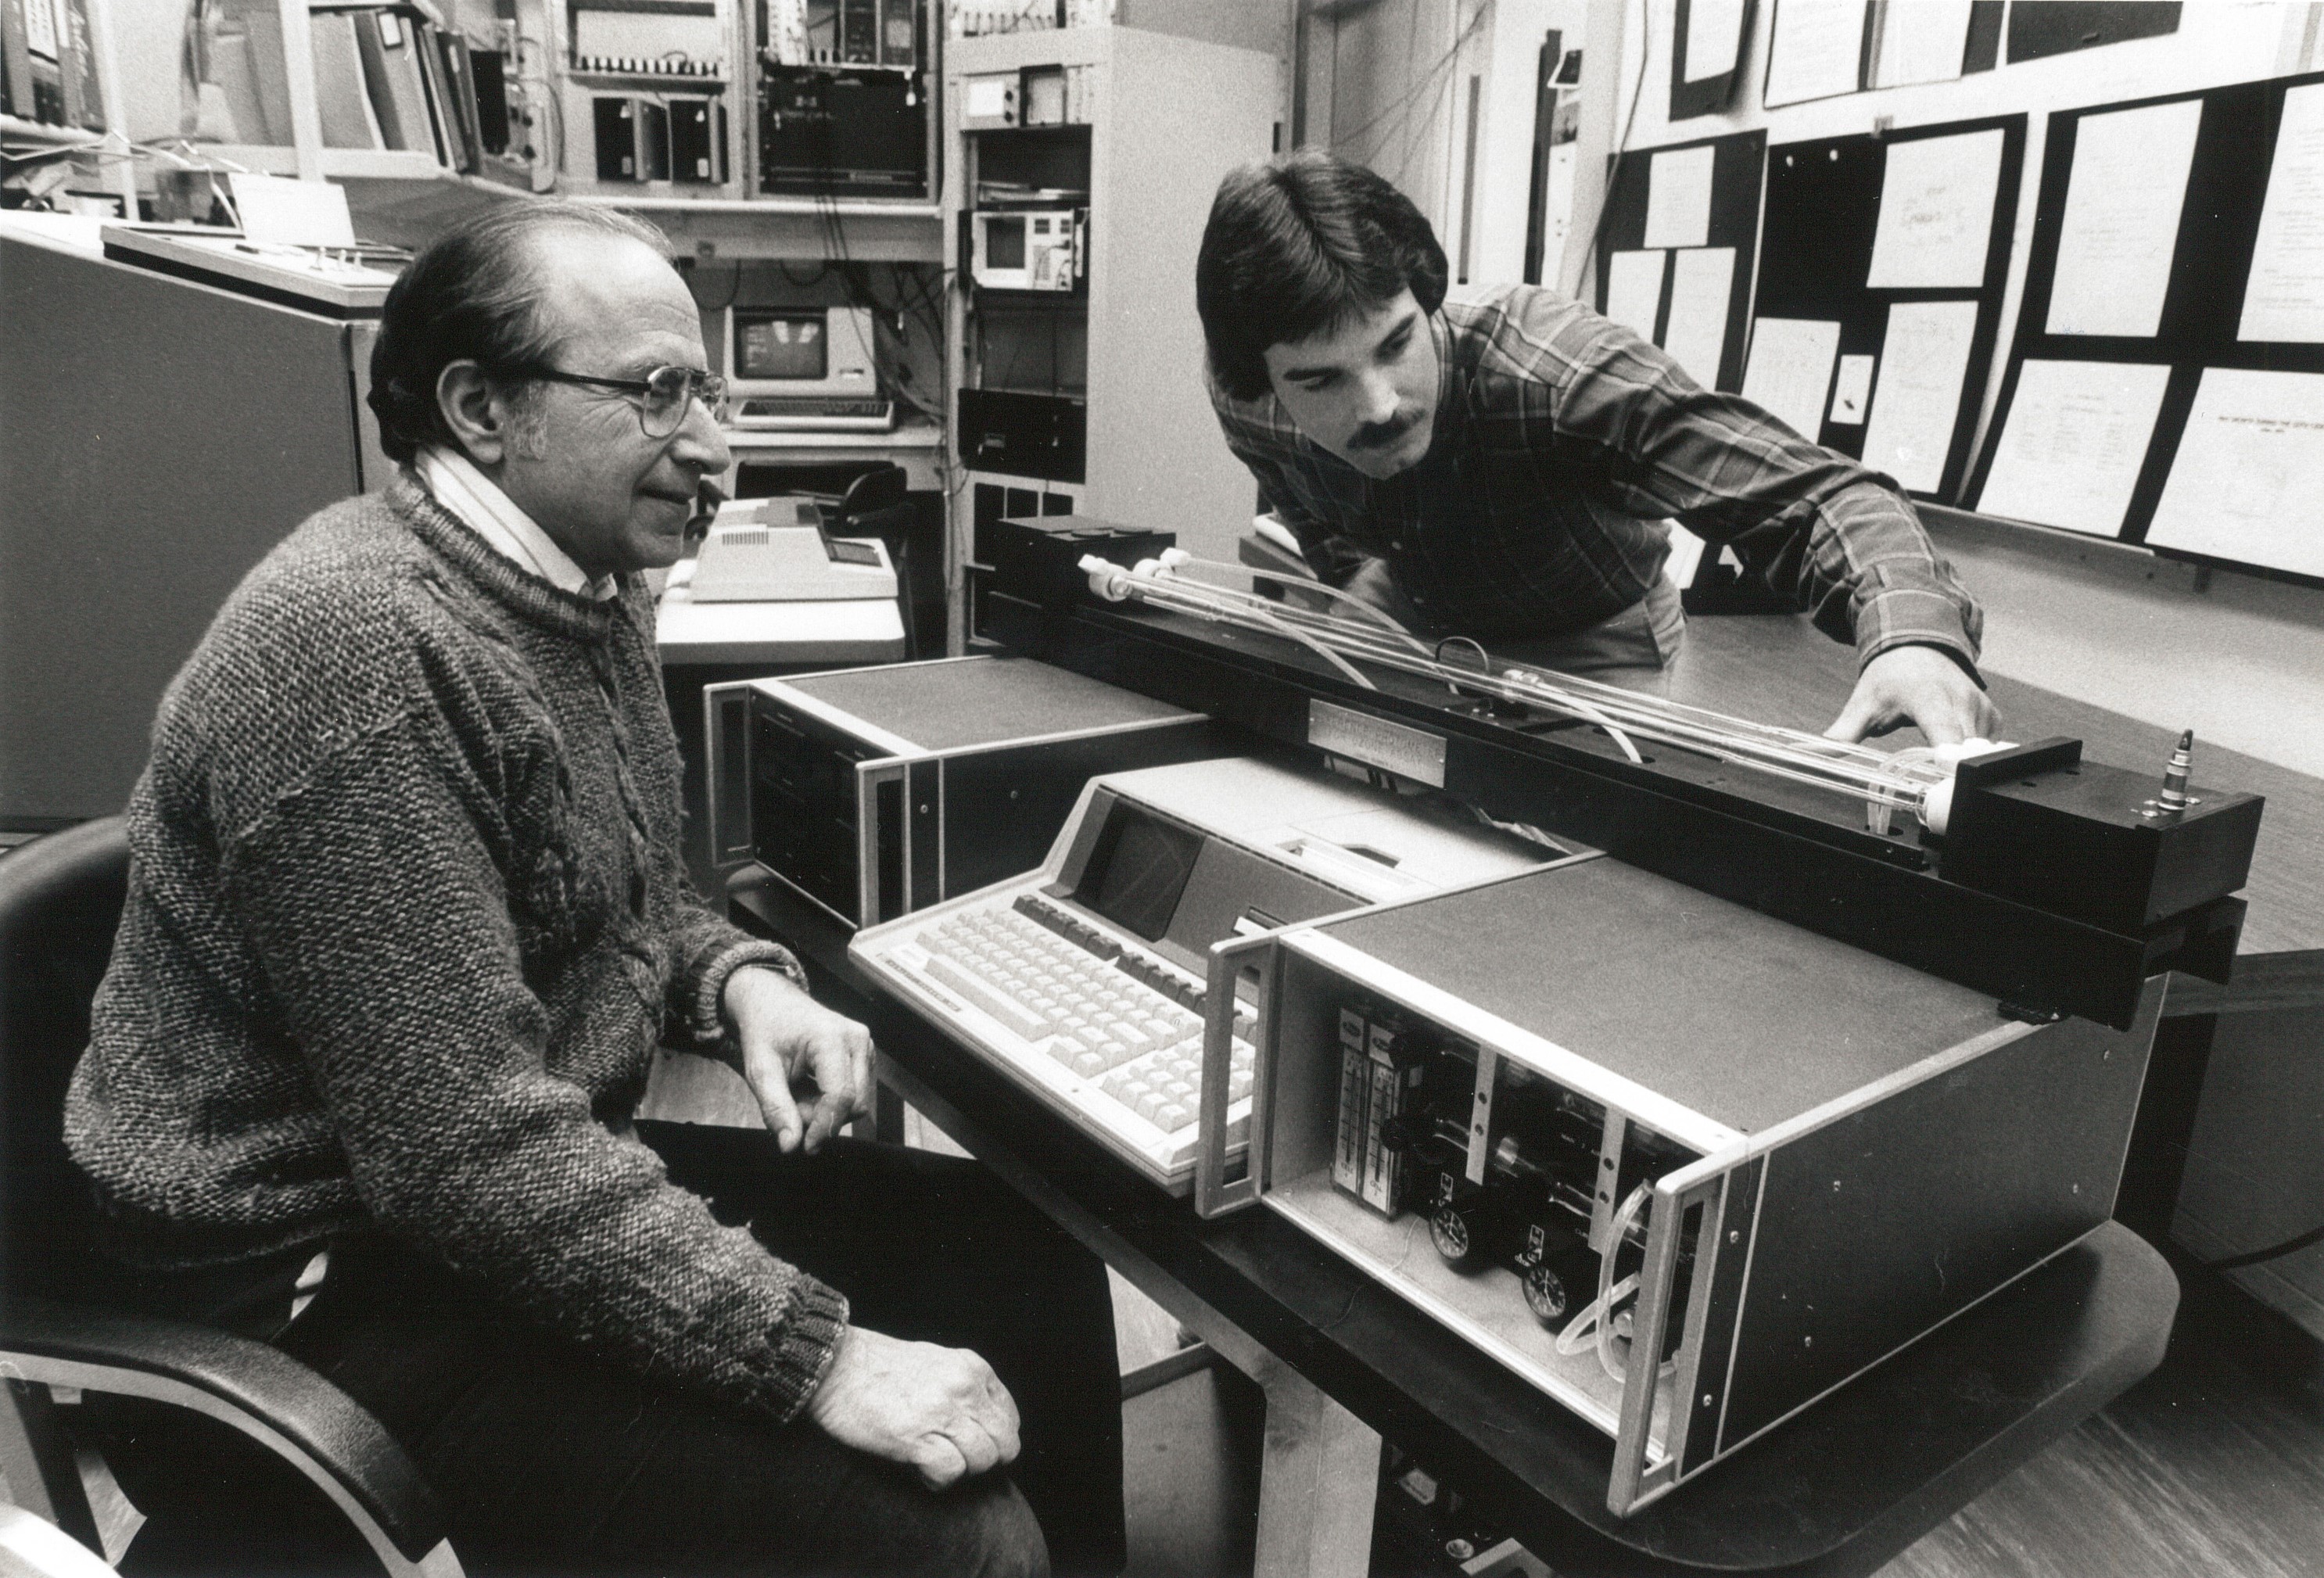 Historical photo shows Arnold Bass seated next to a scientific instrument while Jim Norris leans over a horizontal component.